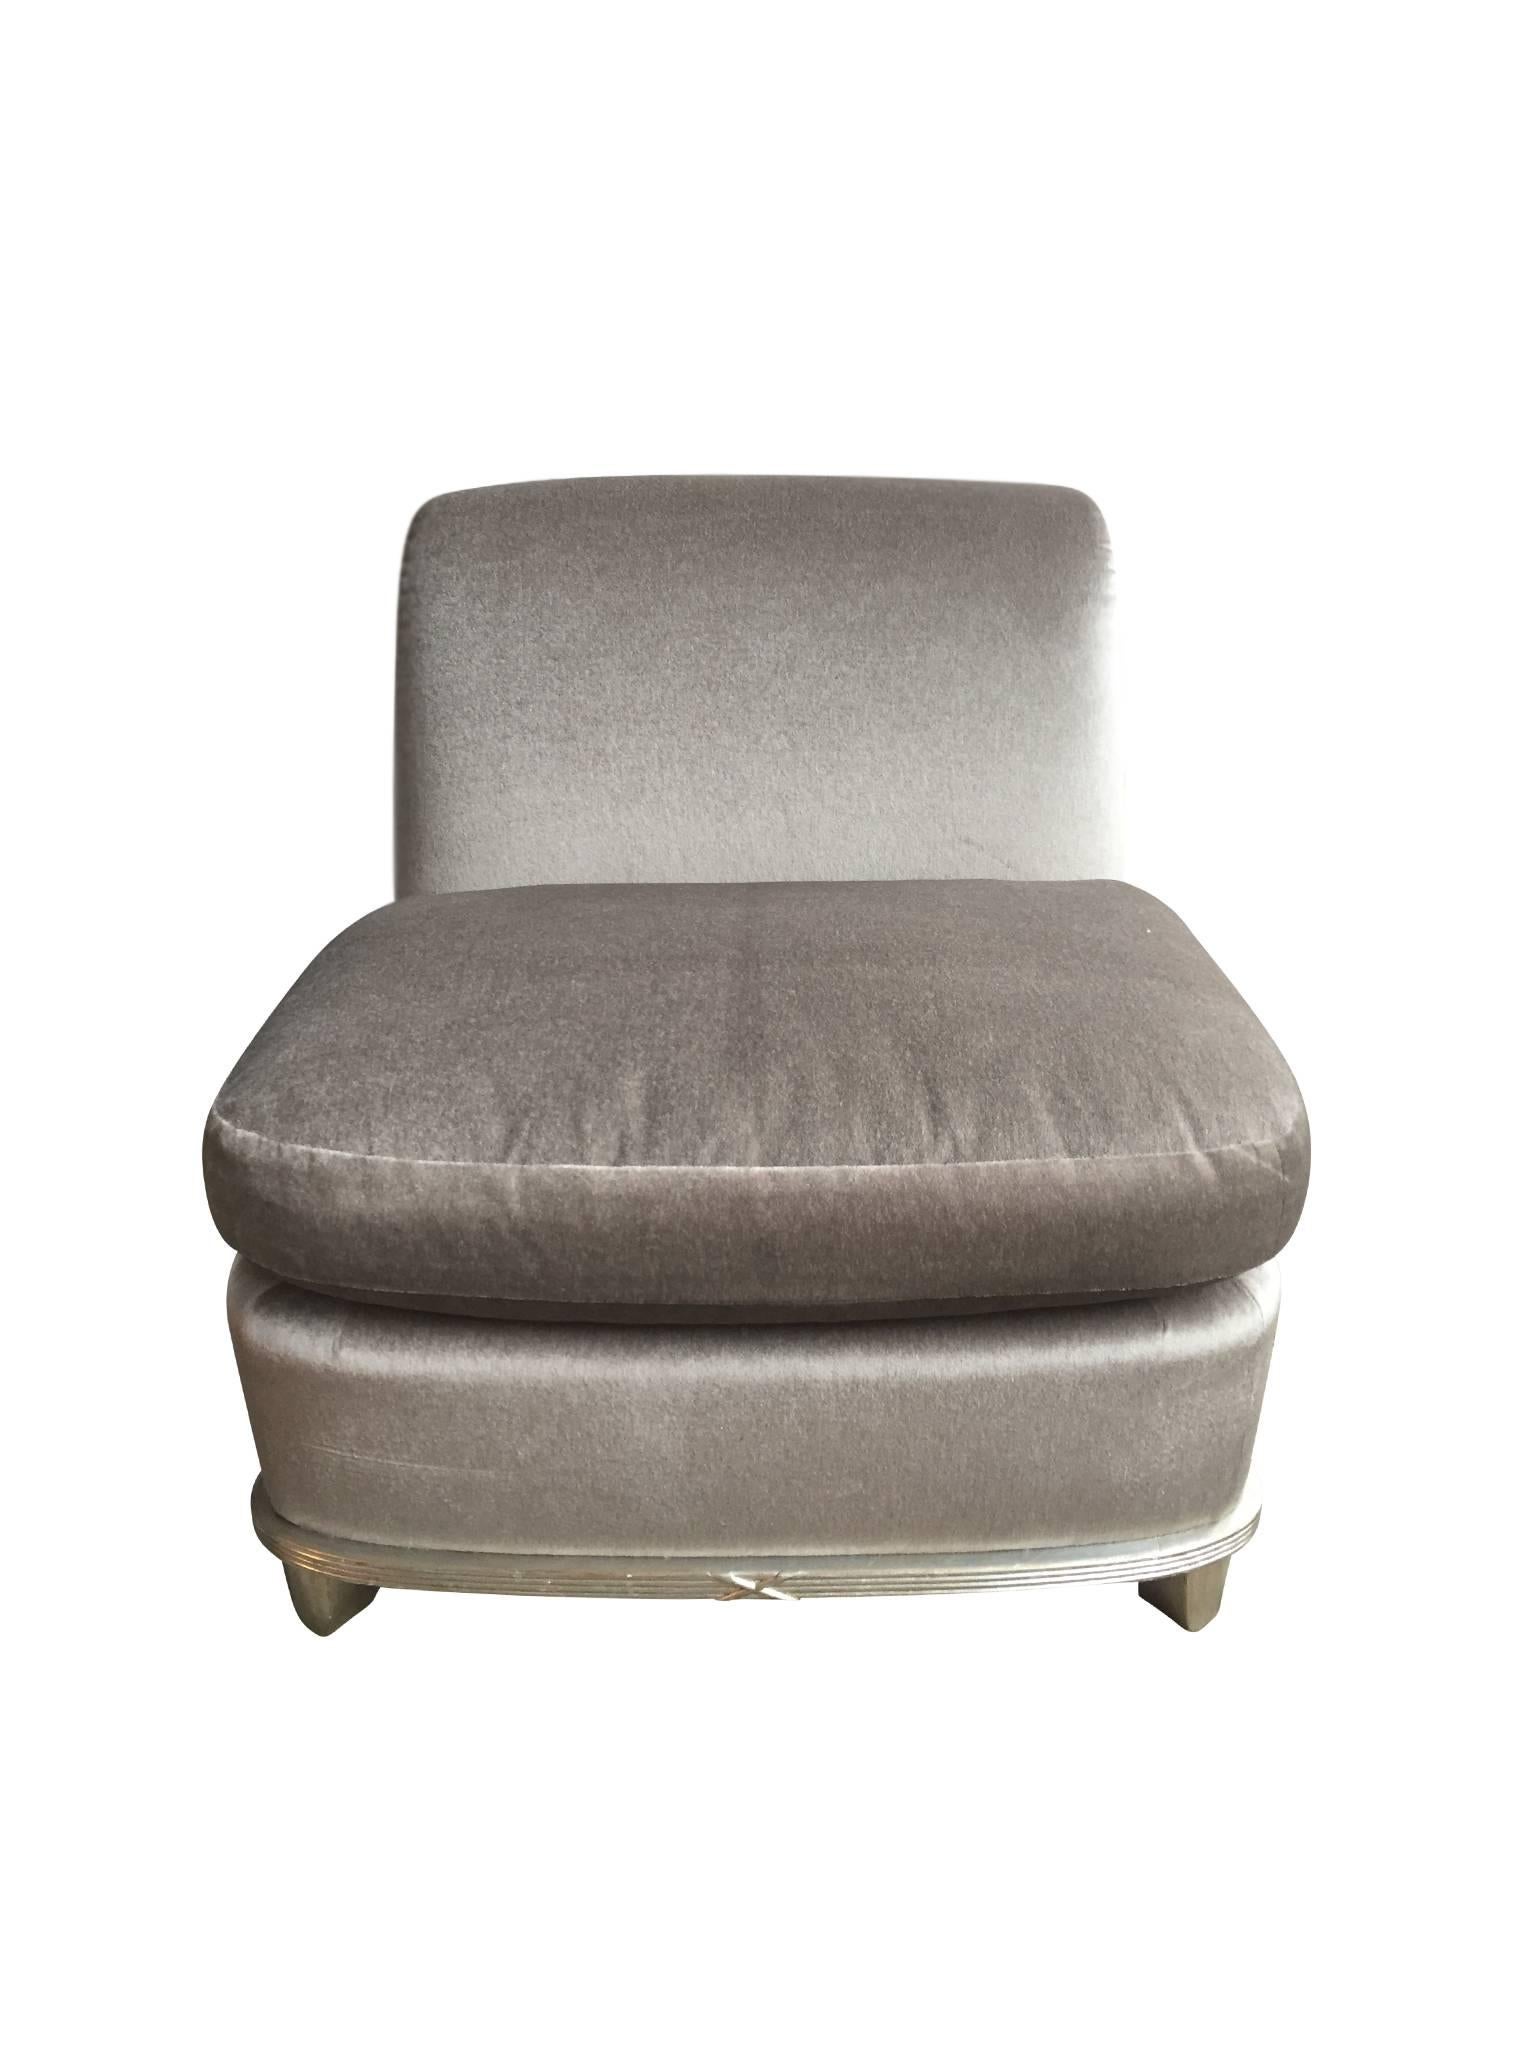 This stunning lounge or slipper chair was made in the 1960s. It was recently reupholstered in a silver mohair, which catches the light and shines beautifully. Along with this soft upholstery, the cushioning is plump and comfortable. This is a chair